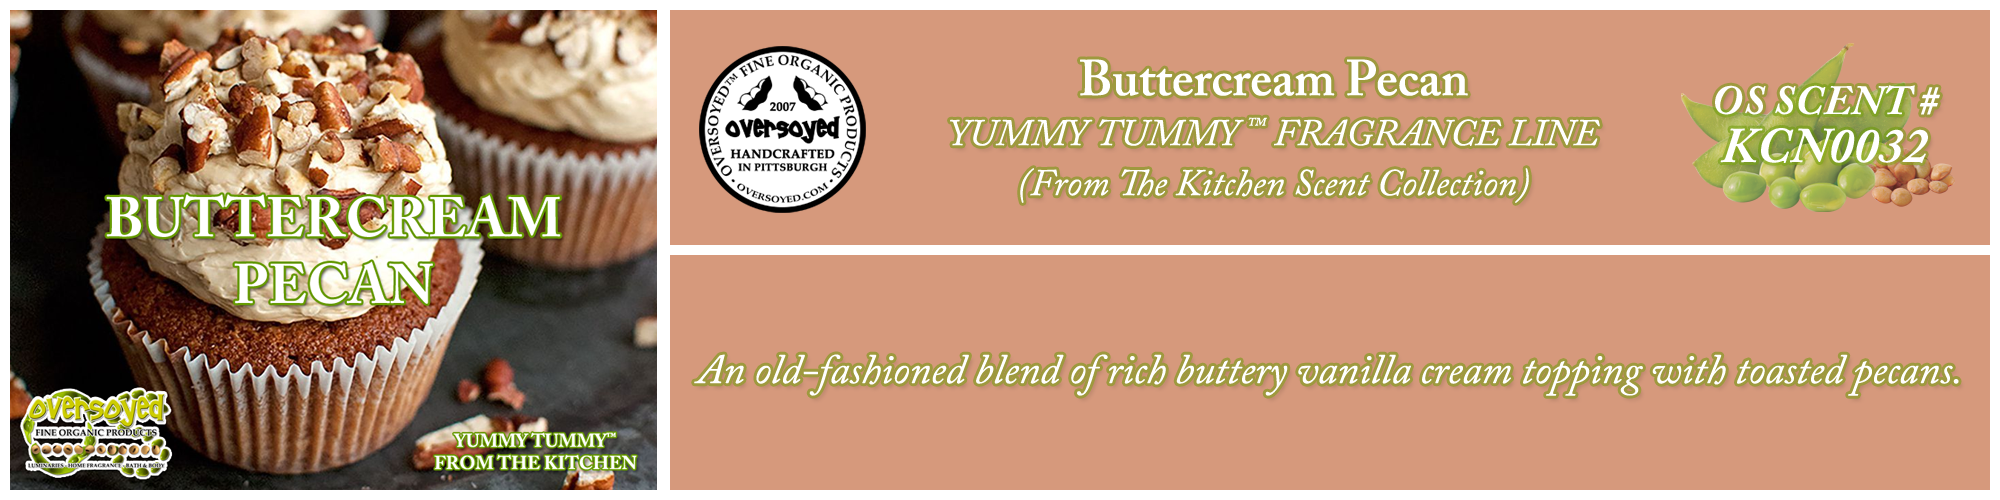 Buttercream Pecan Handcrafted Products Collection